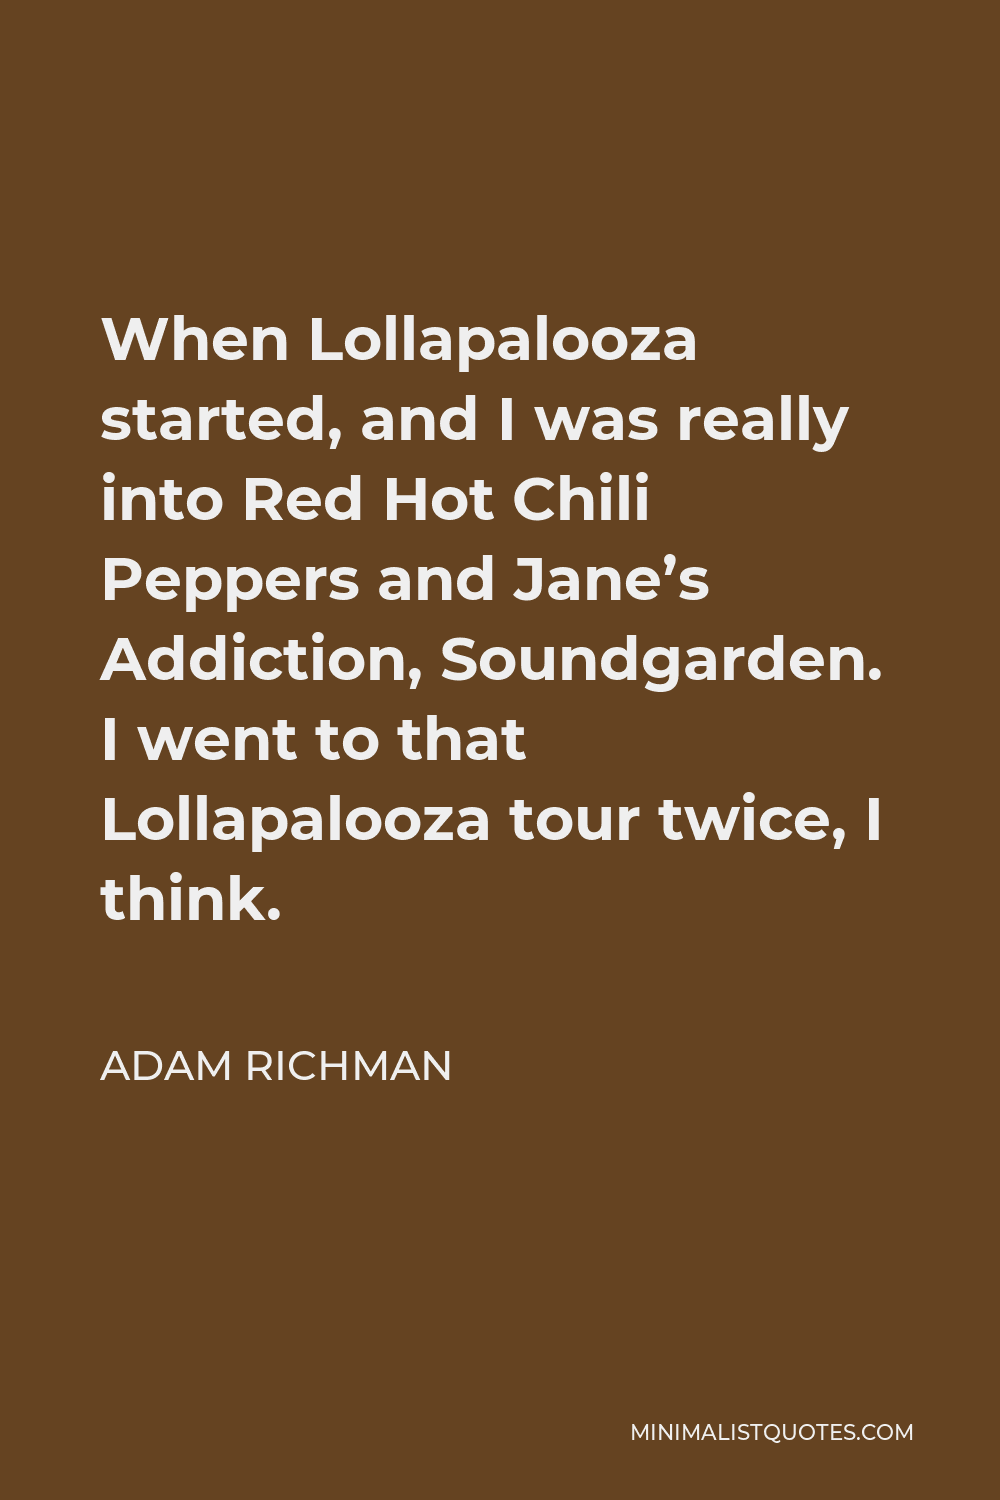 Adam Richman Quote - When Lollapalooza started, and I was really into Red Hot Chili Peppers and Jane’s Addiction, Soundgarden. I went to that Lollapalooza tour twice, I think.